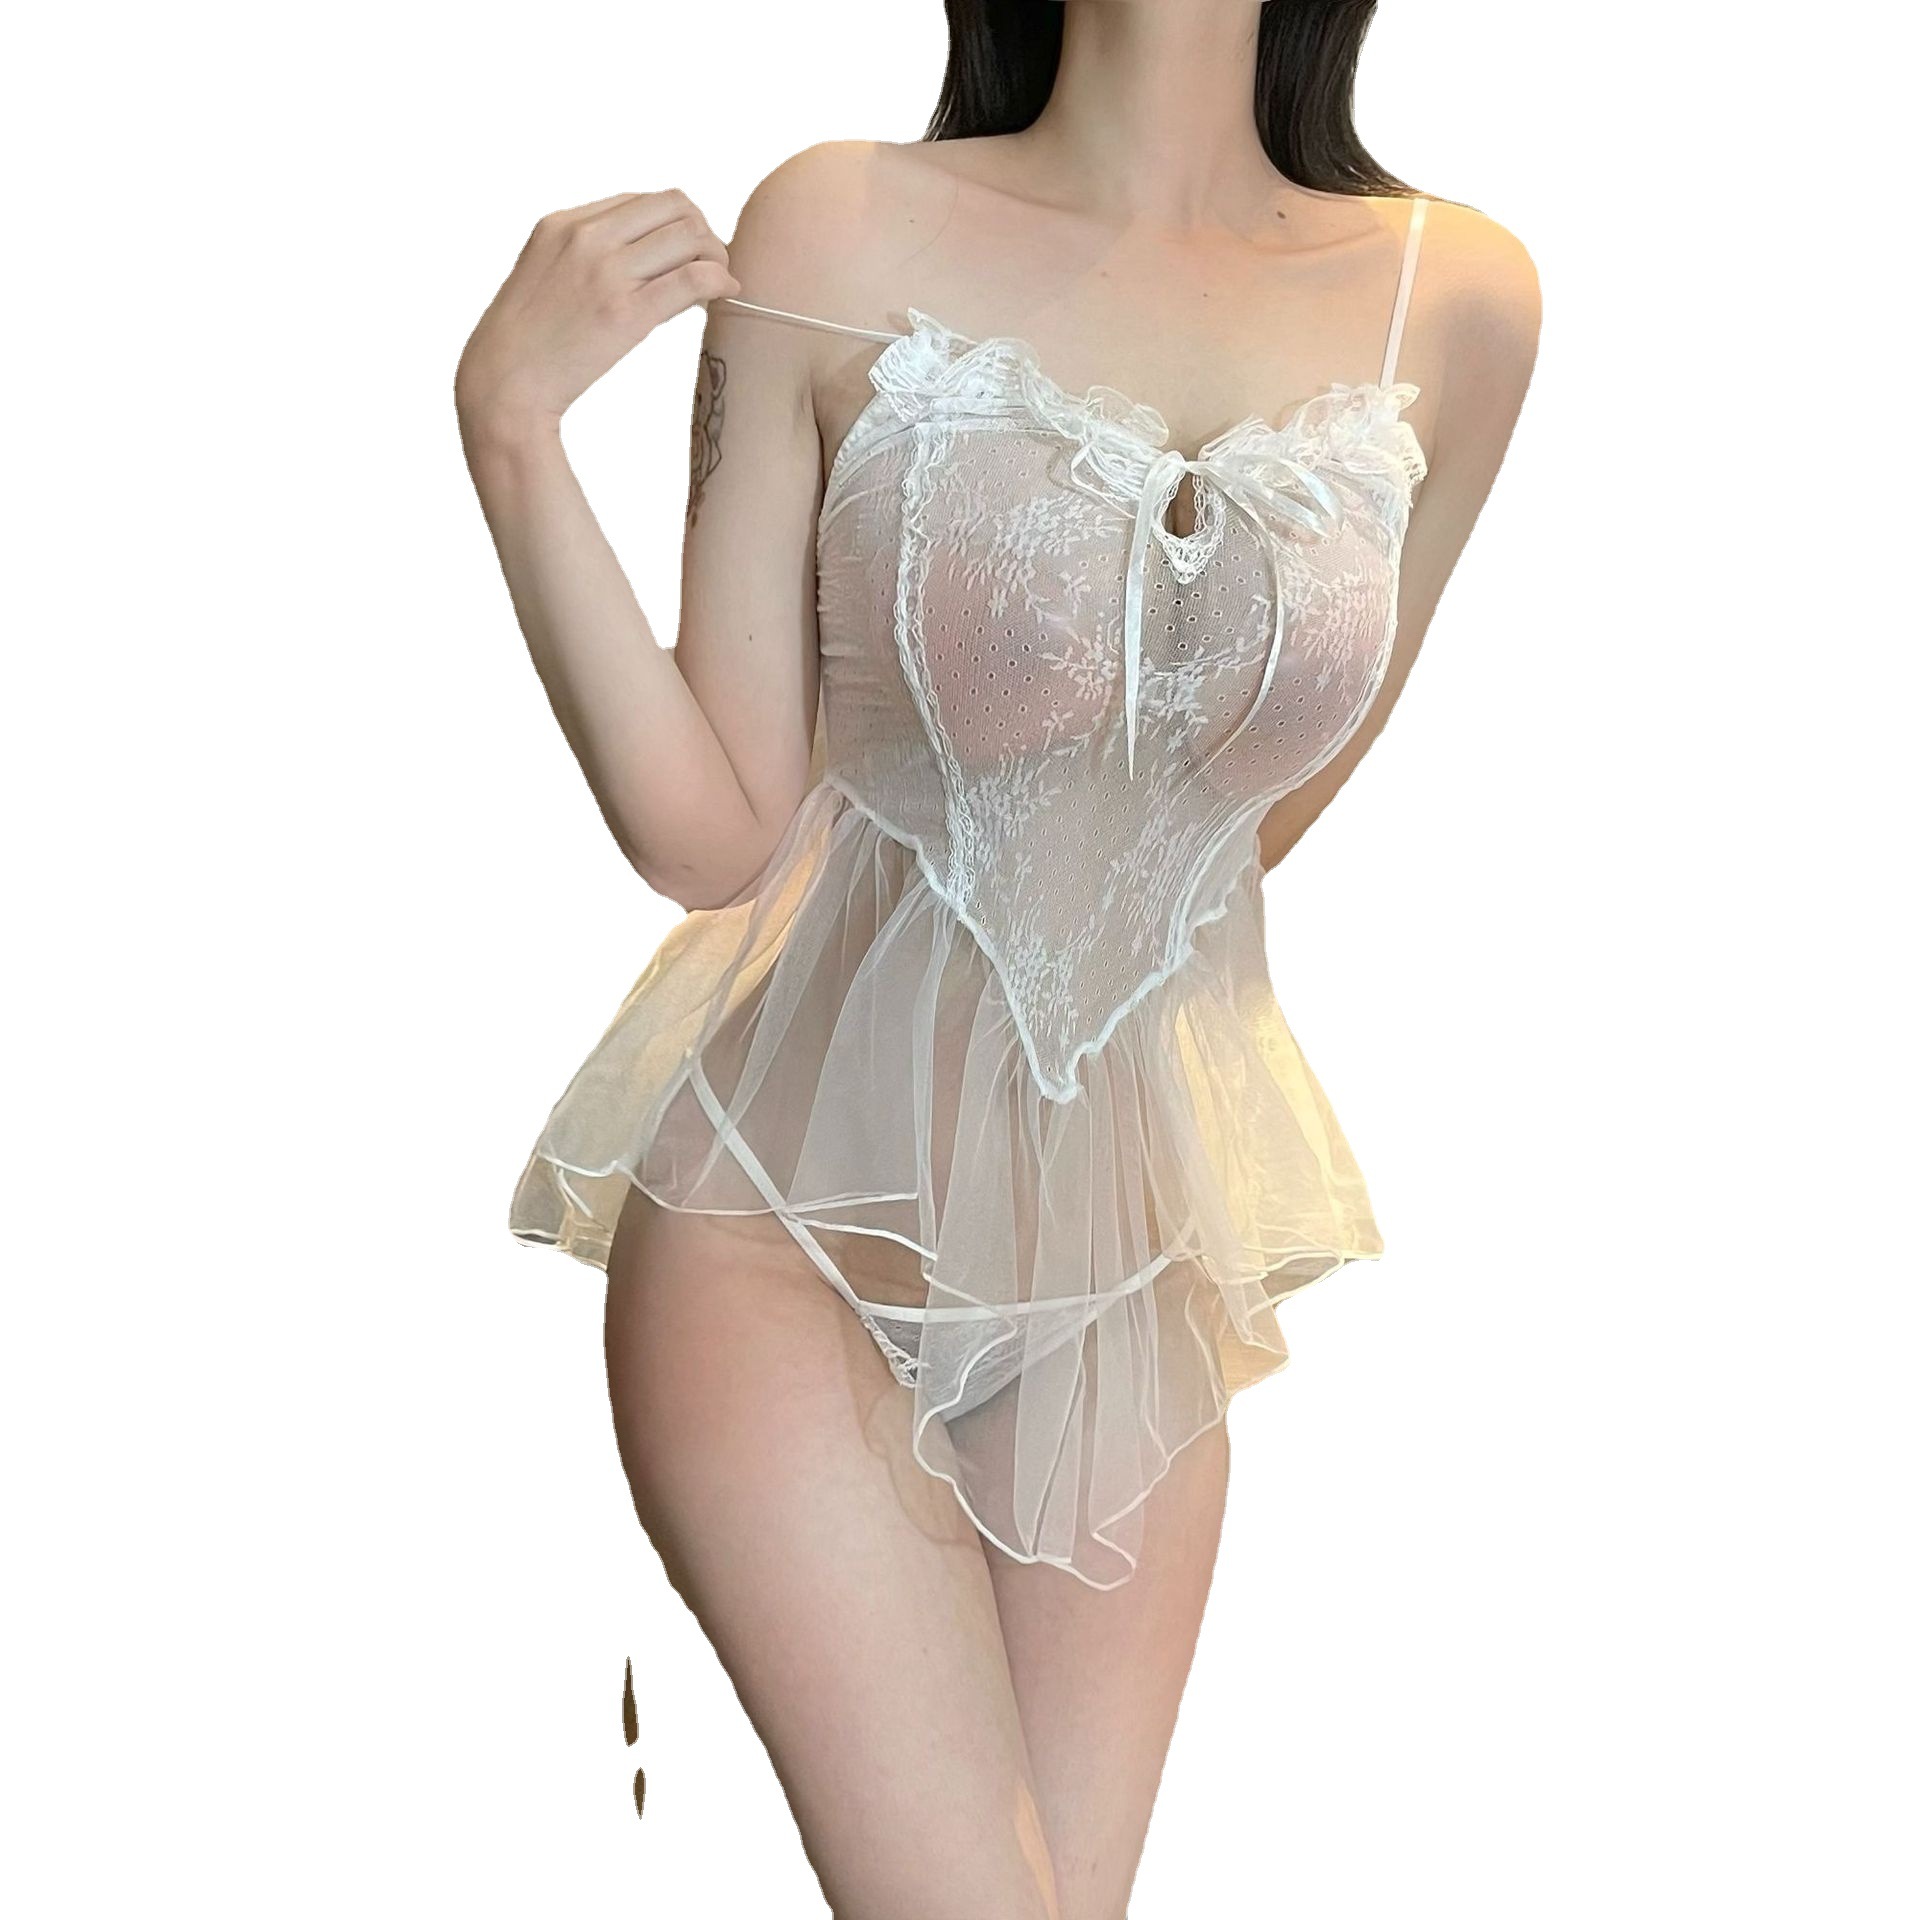 Adult Supplies Sexy Lingerie New Lace Strap Passion Teasing Emotional Supplies See-through Flirting Pajamas for Women